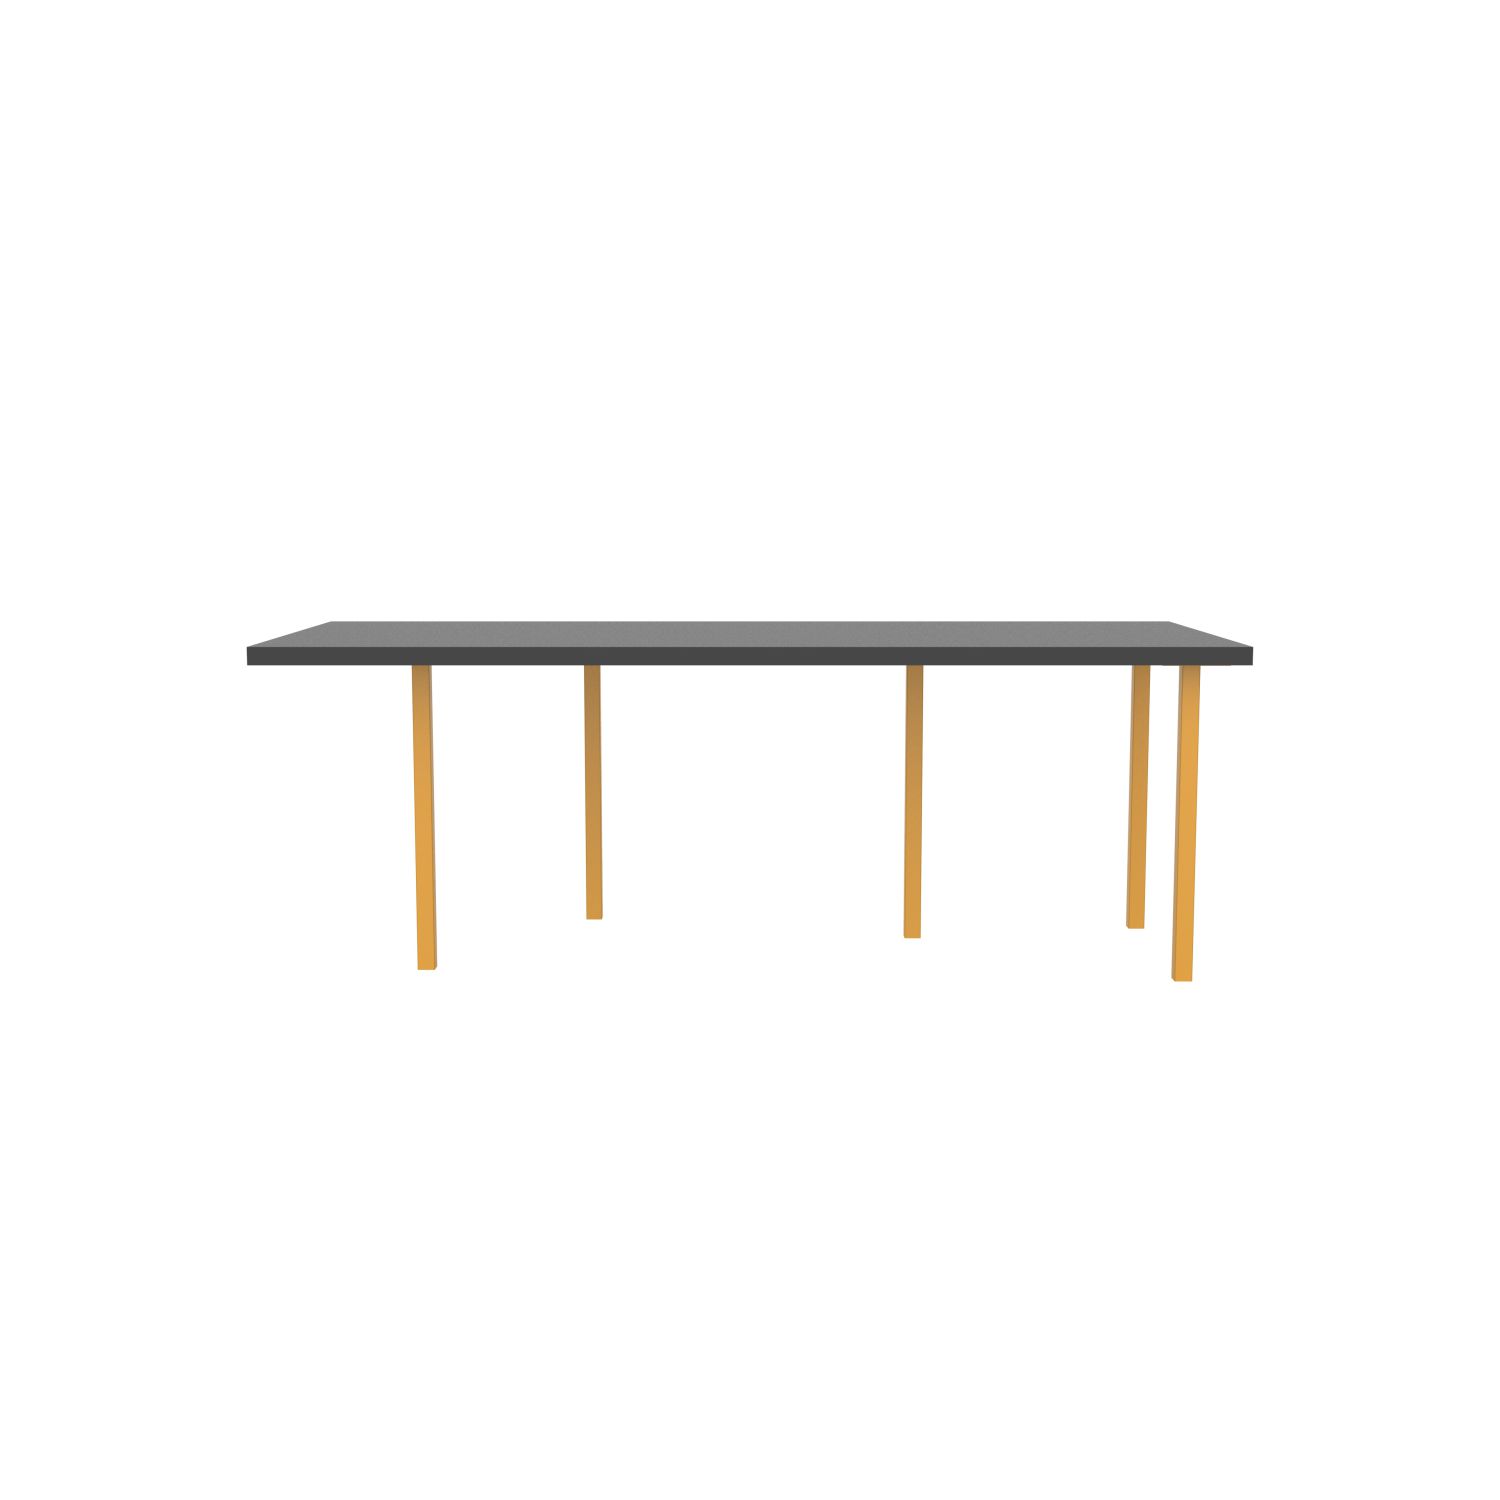 lensvelt bbrand table five fixed heigt 915x218 hpl black 50 mm price level 1 yellow ral1004